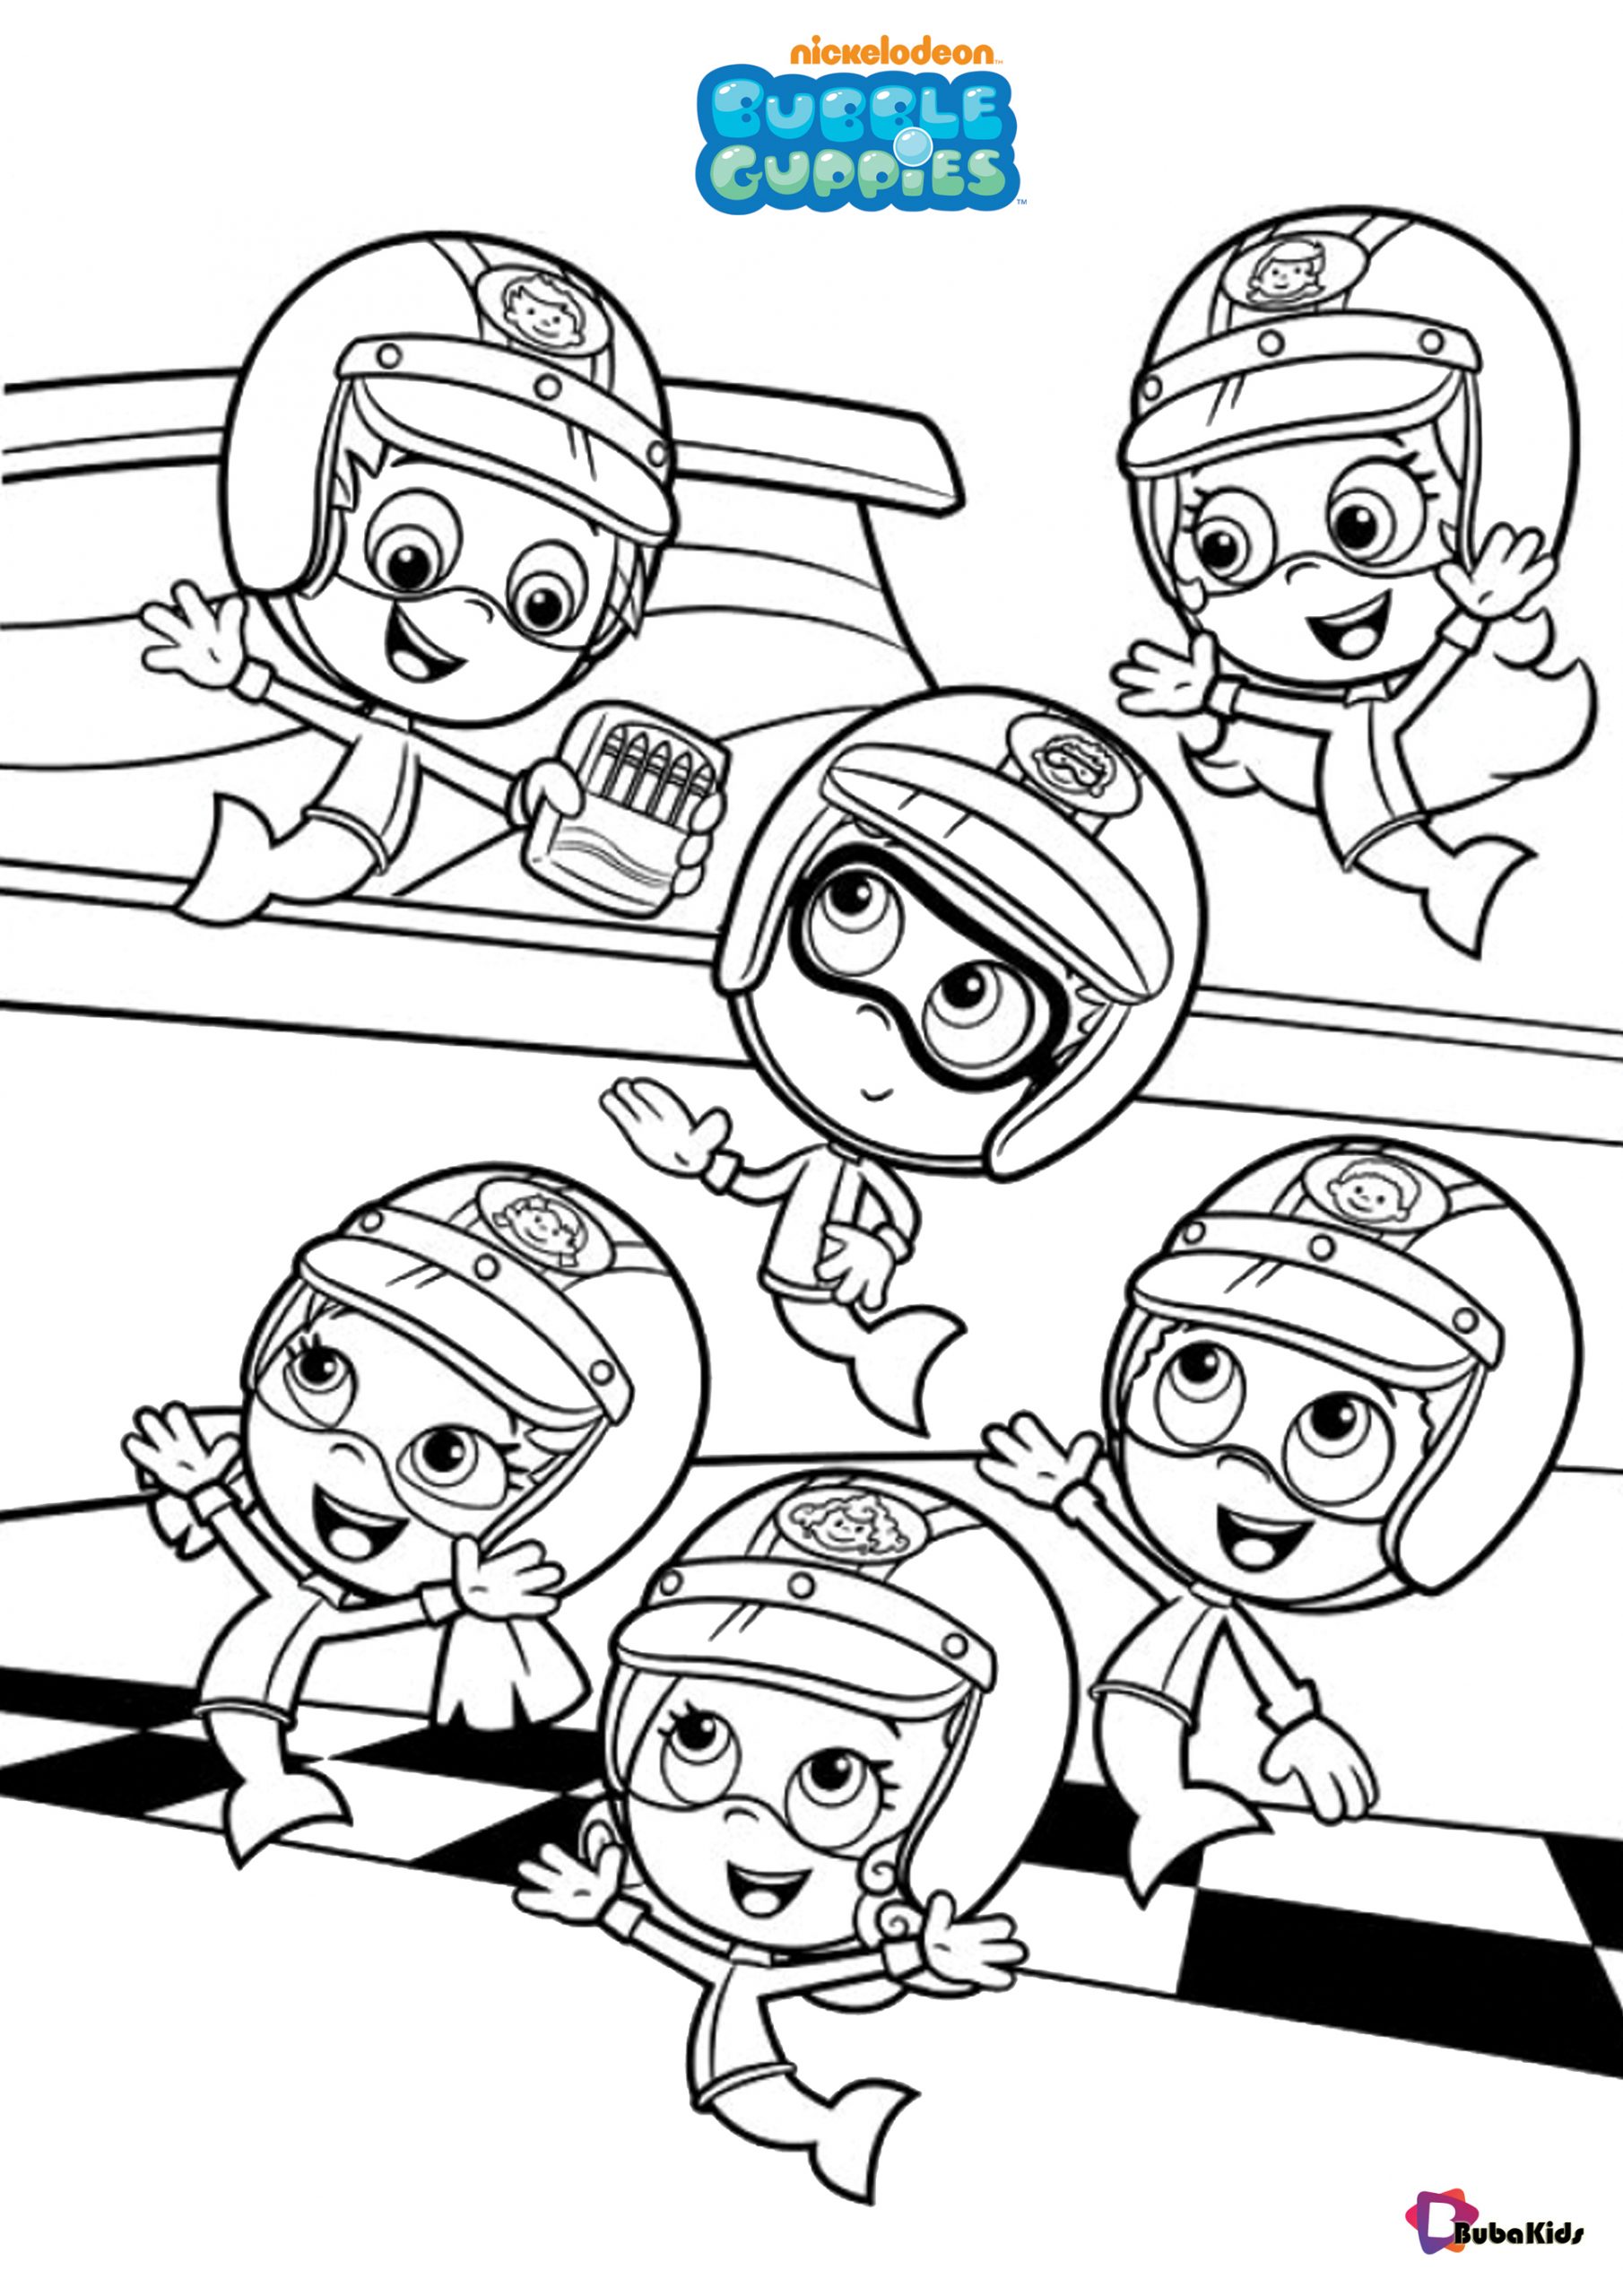 Free Bubble Guppies coloring pages to print Wallpaper